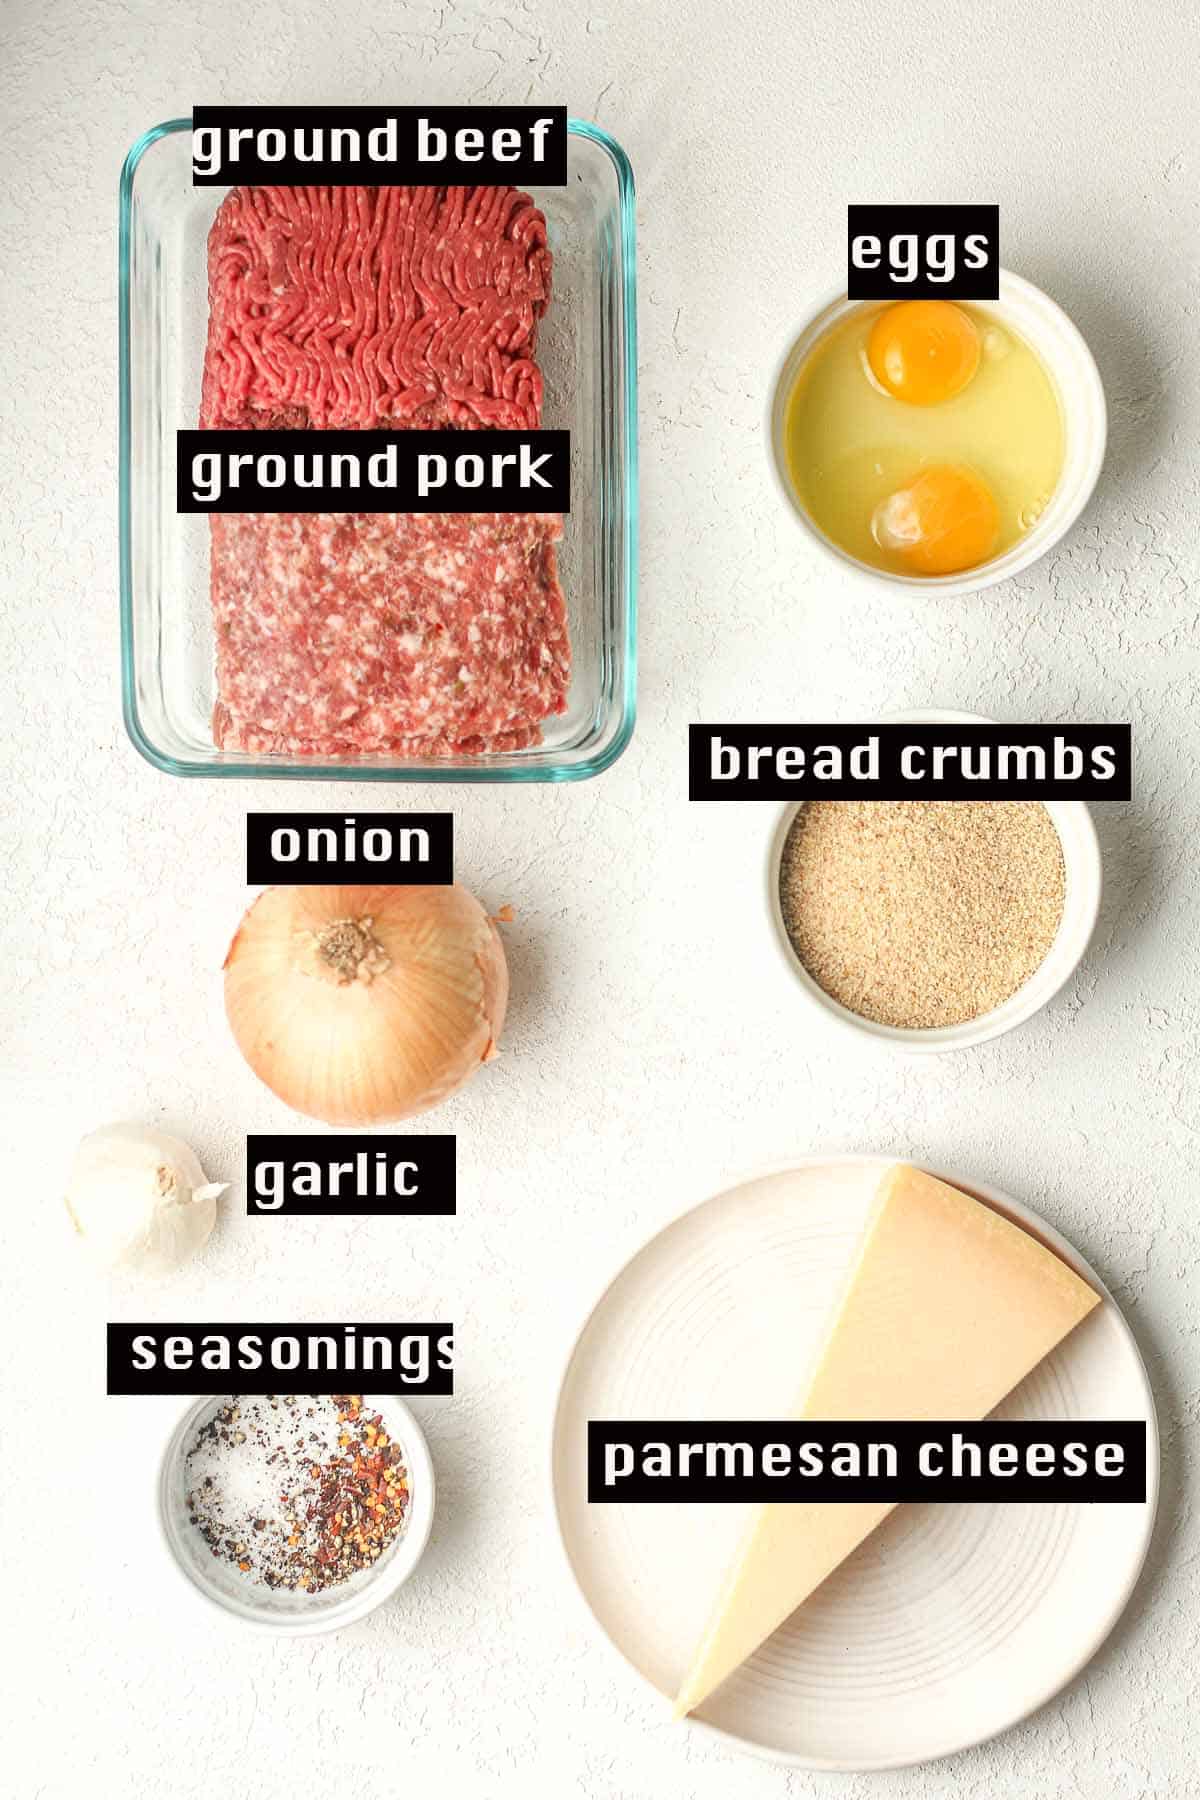 The labeled ingredients for the Italian meatballs.